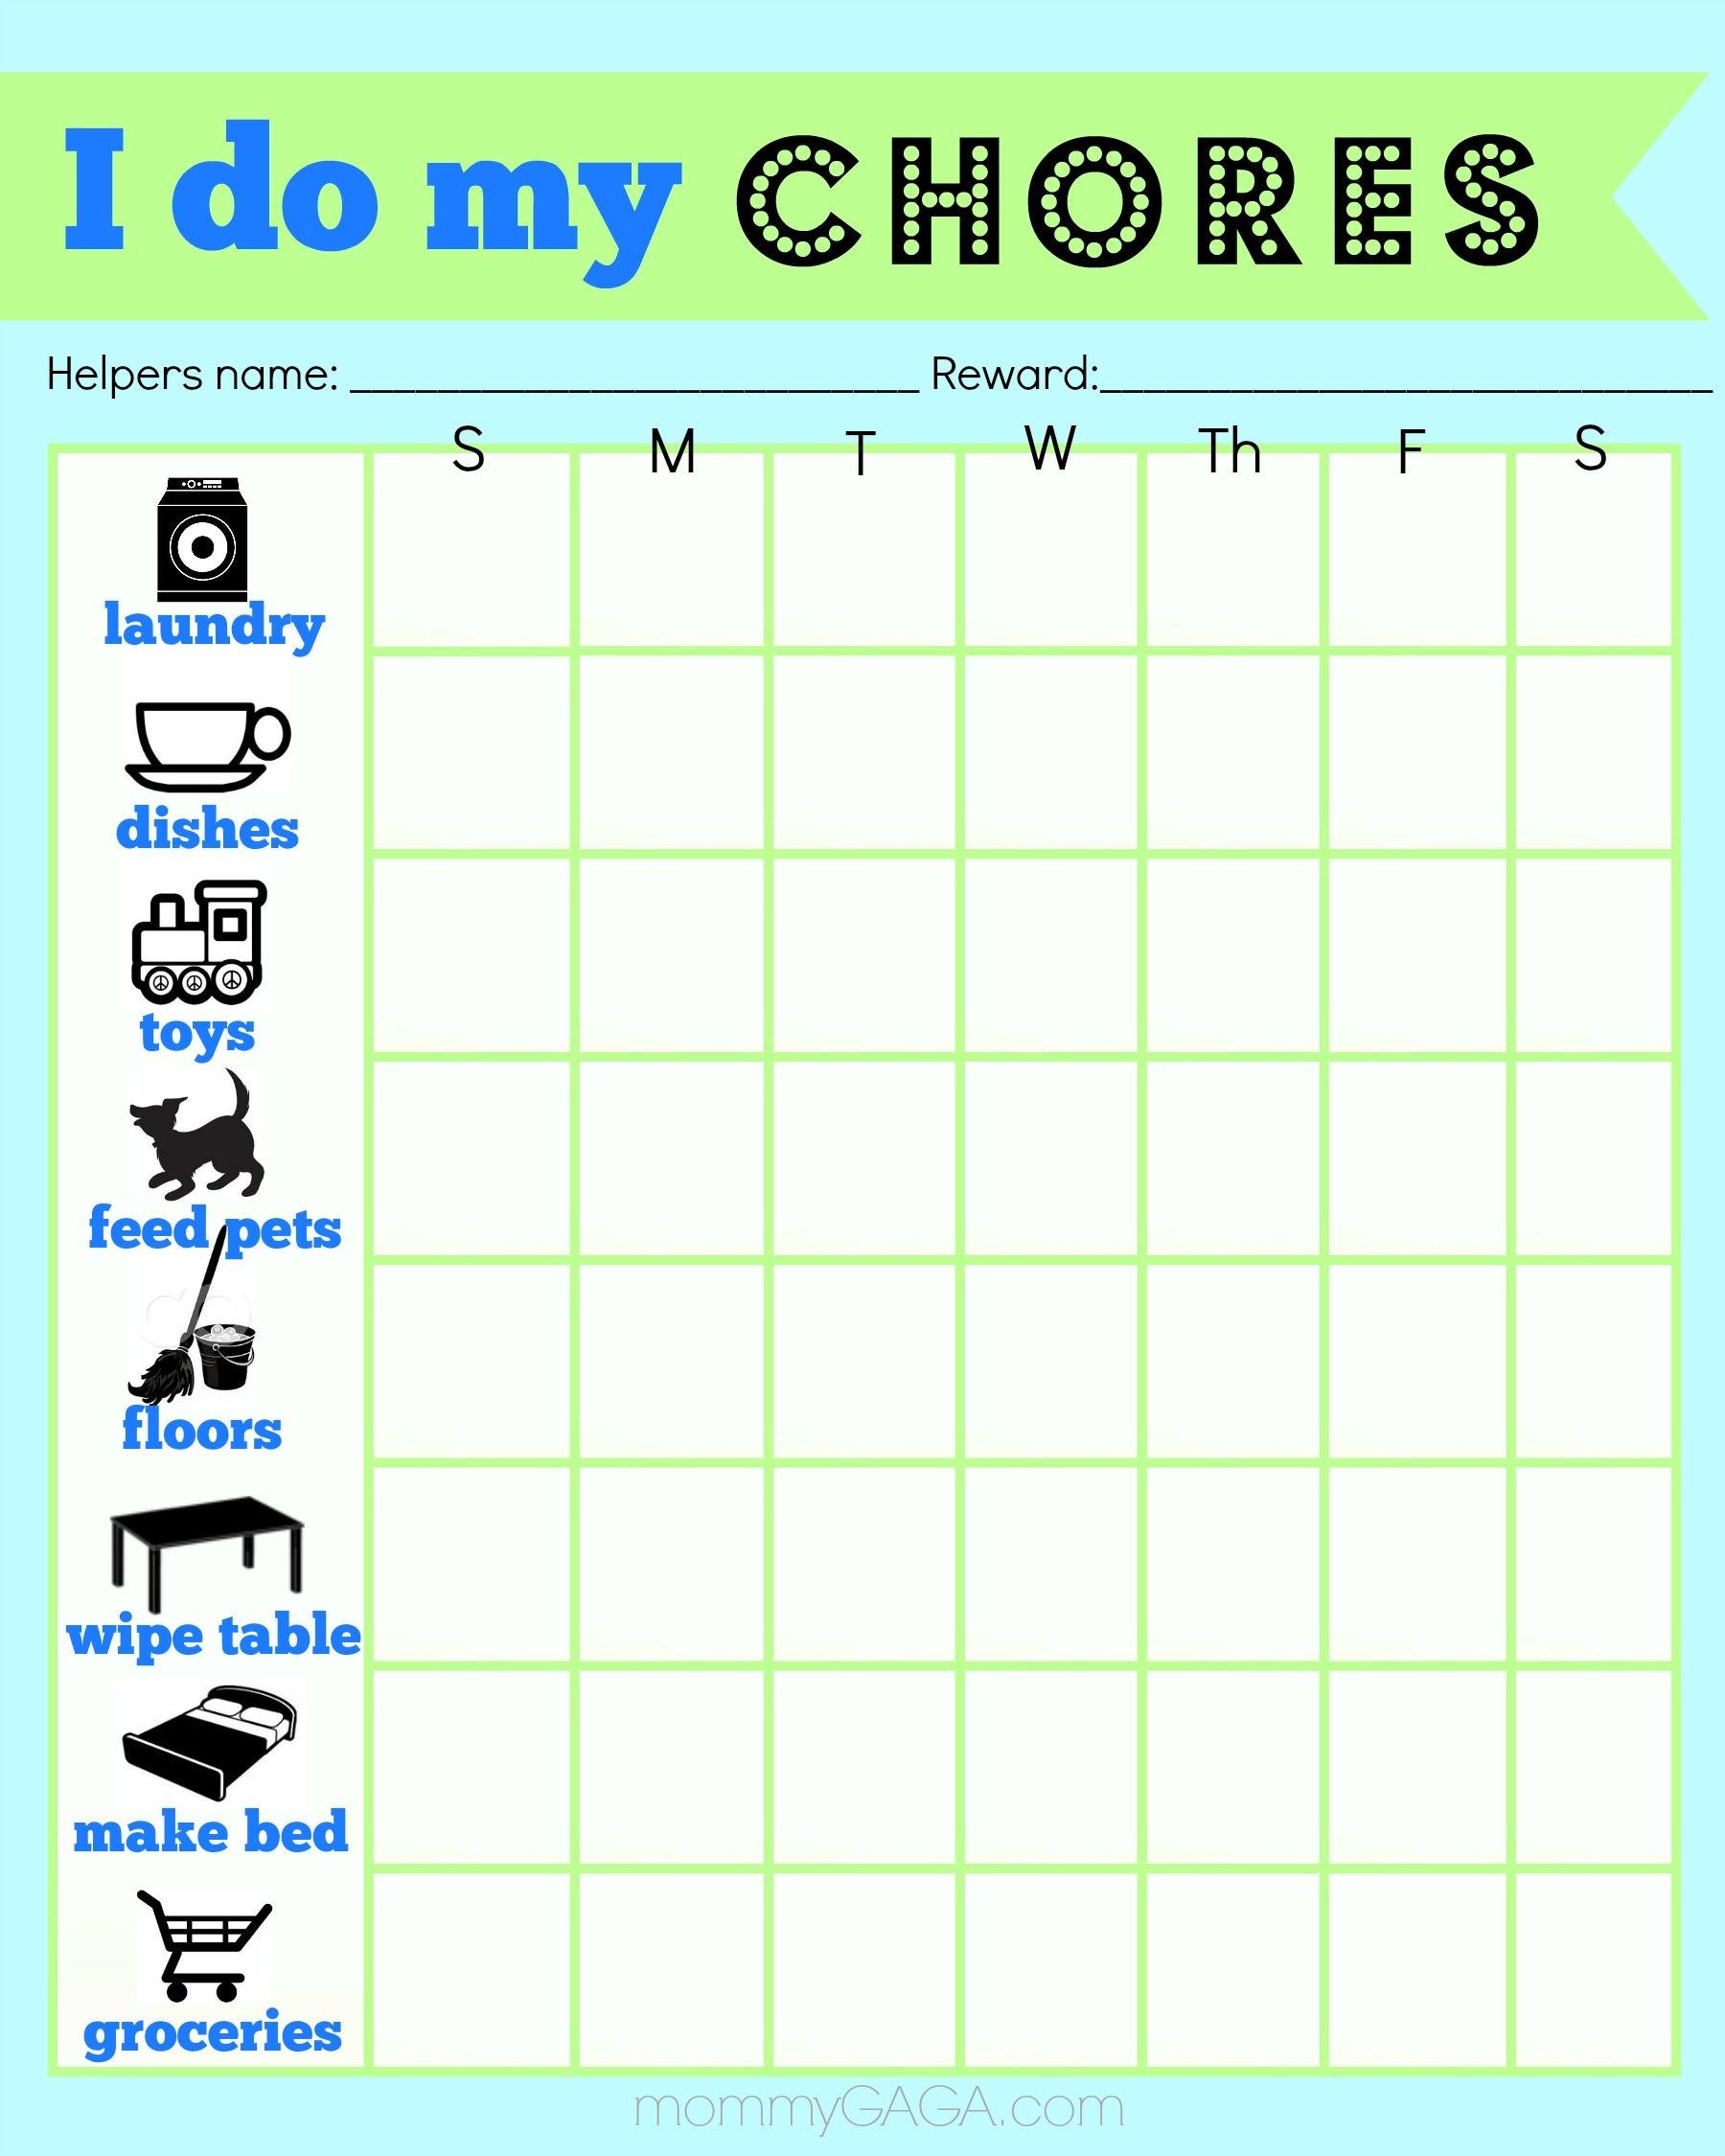 free-printable-chore-charts-for-7-year-olds-weekly-chart-kids-vrogue